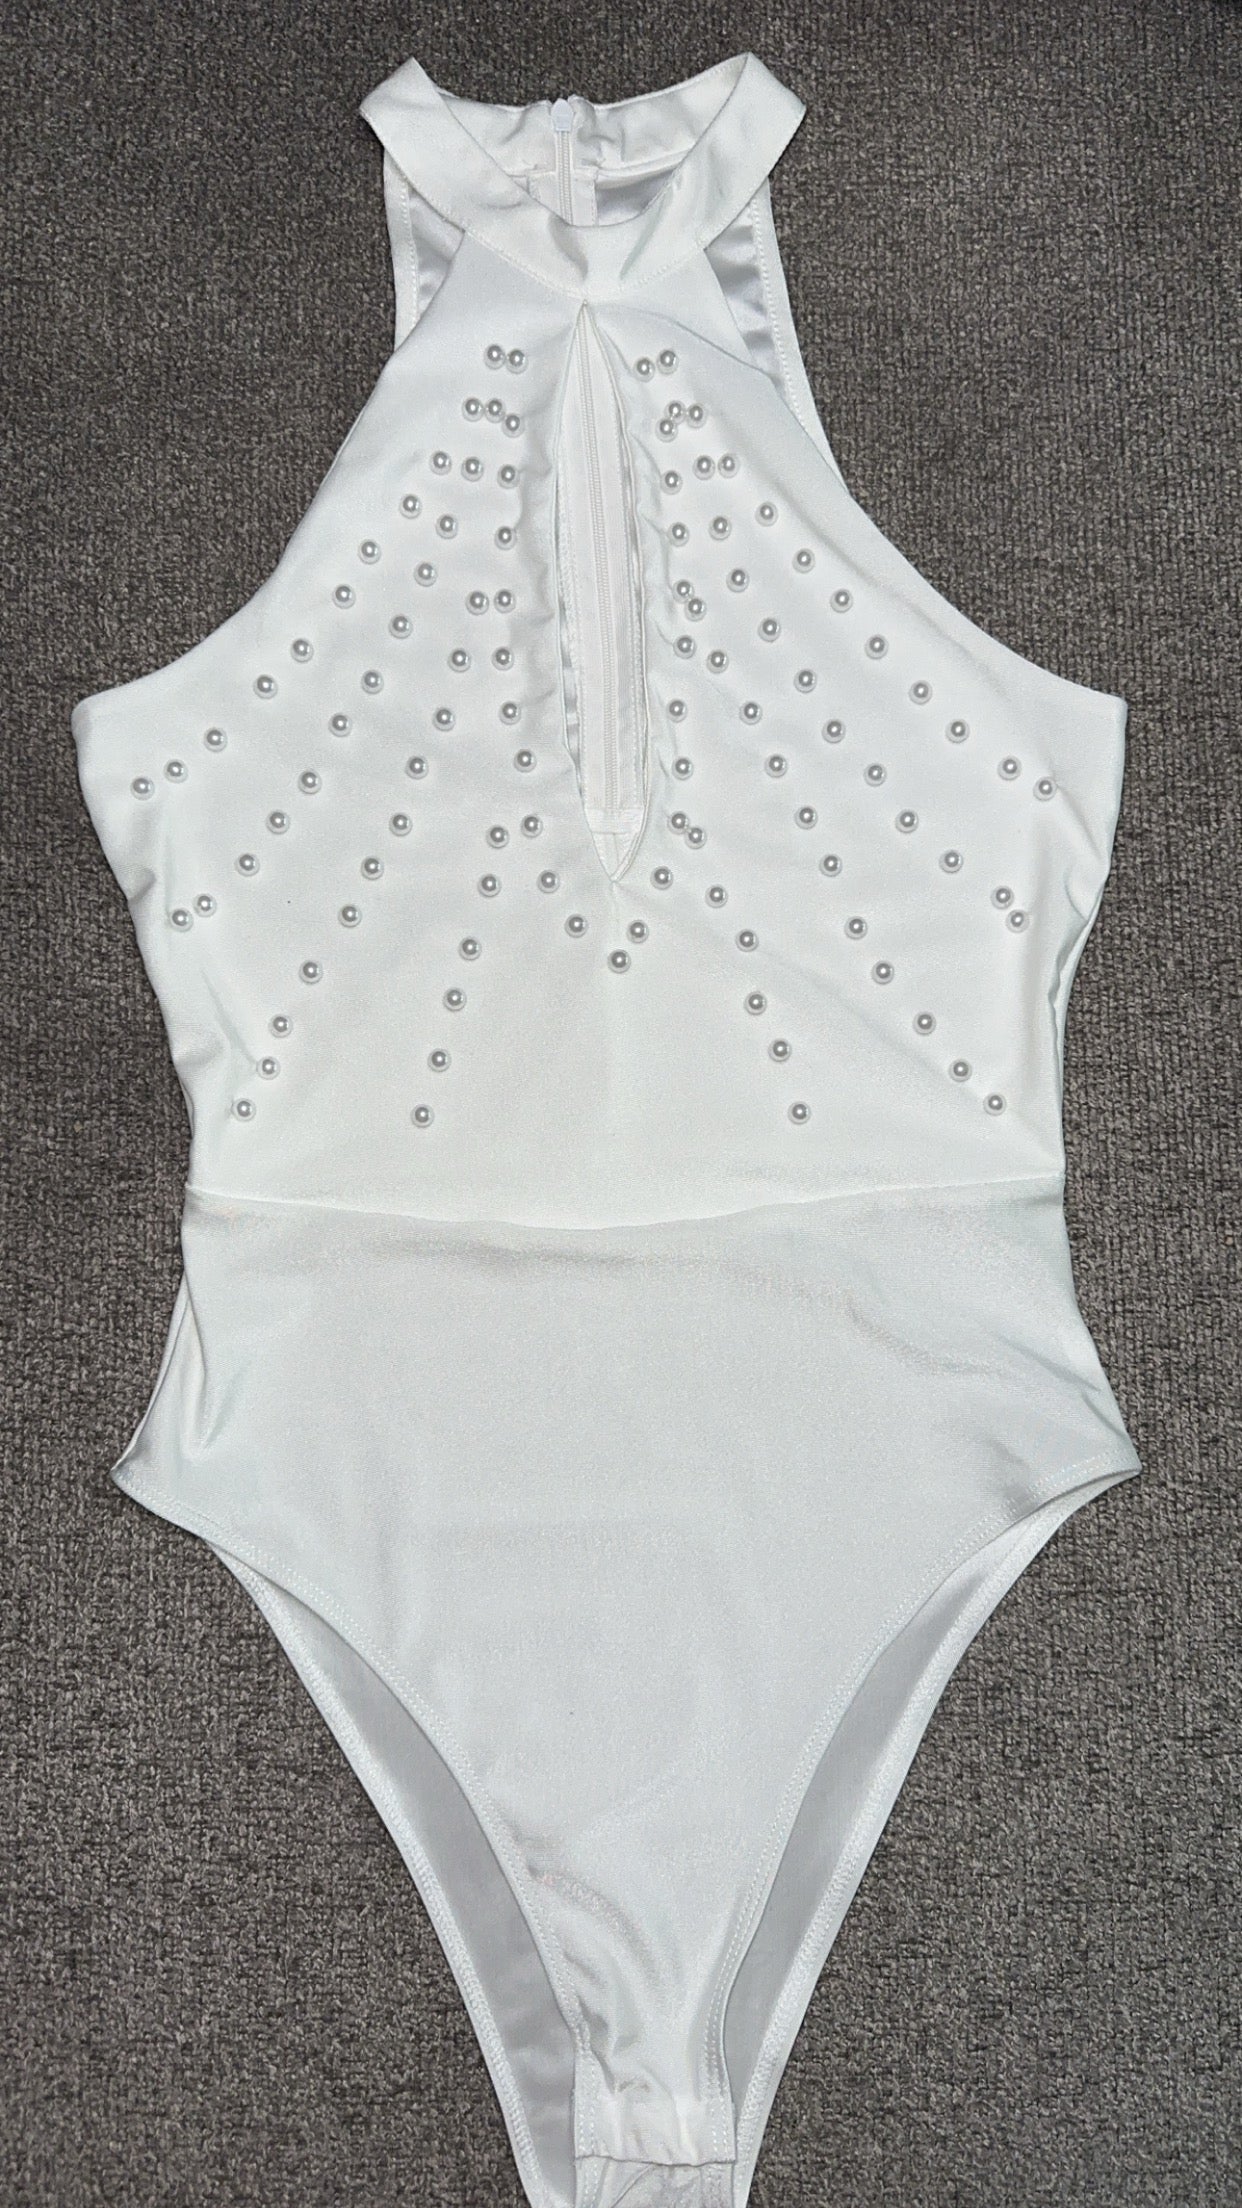 CHIC AND CLASSY PEARL BODY SUIT